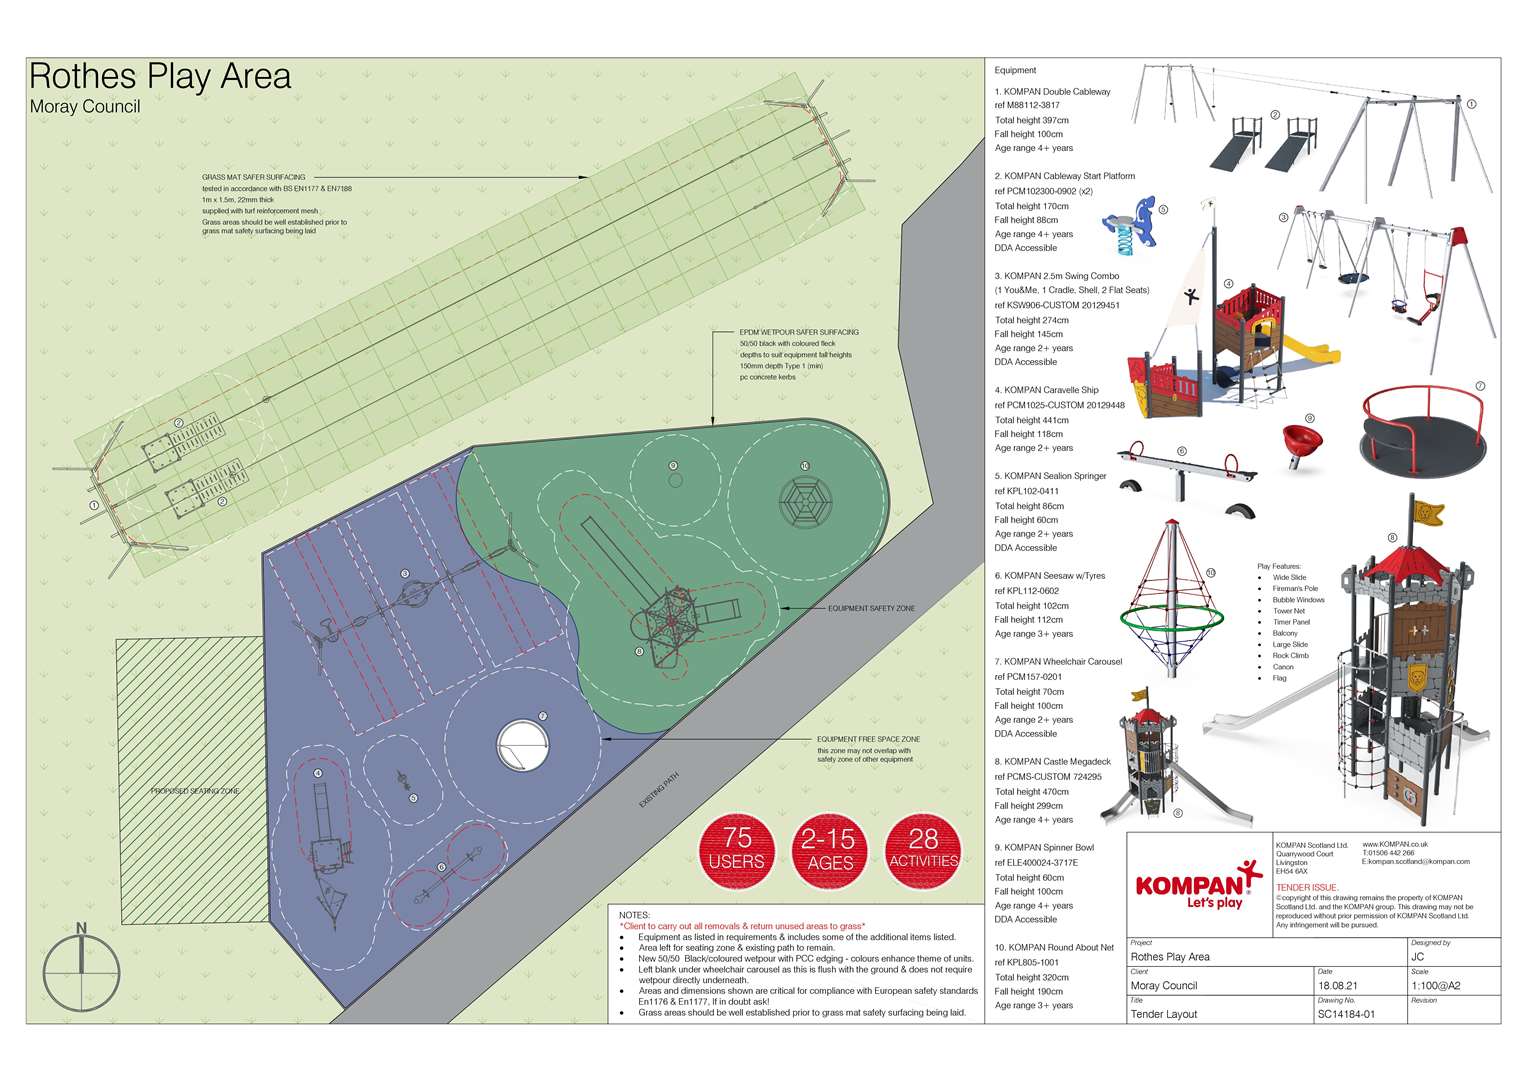 The propsed layout of the new park.